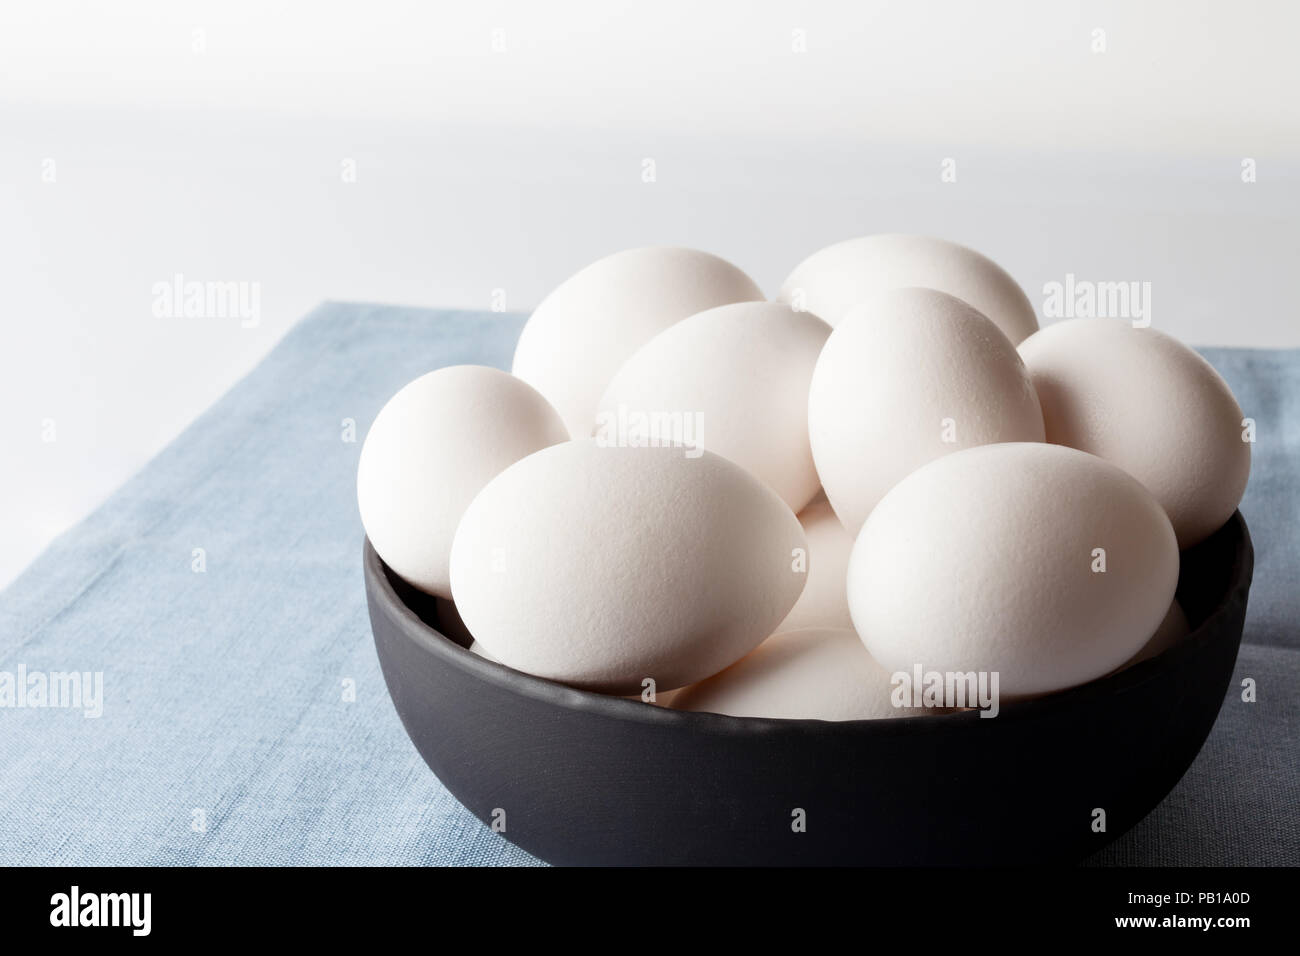 White eggs in a black bowl on blue linen napkin on white background from side off centre composition Stock Photo